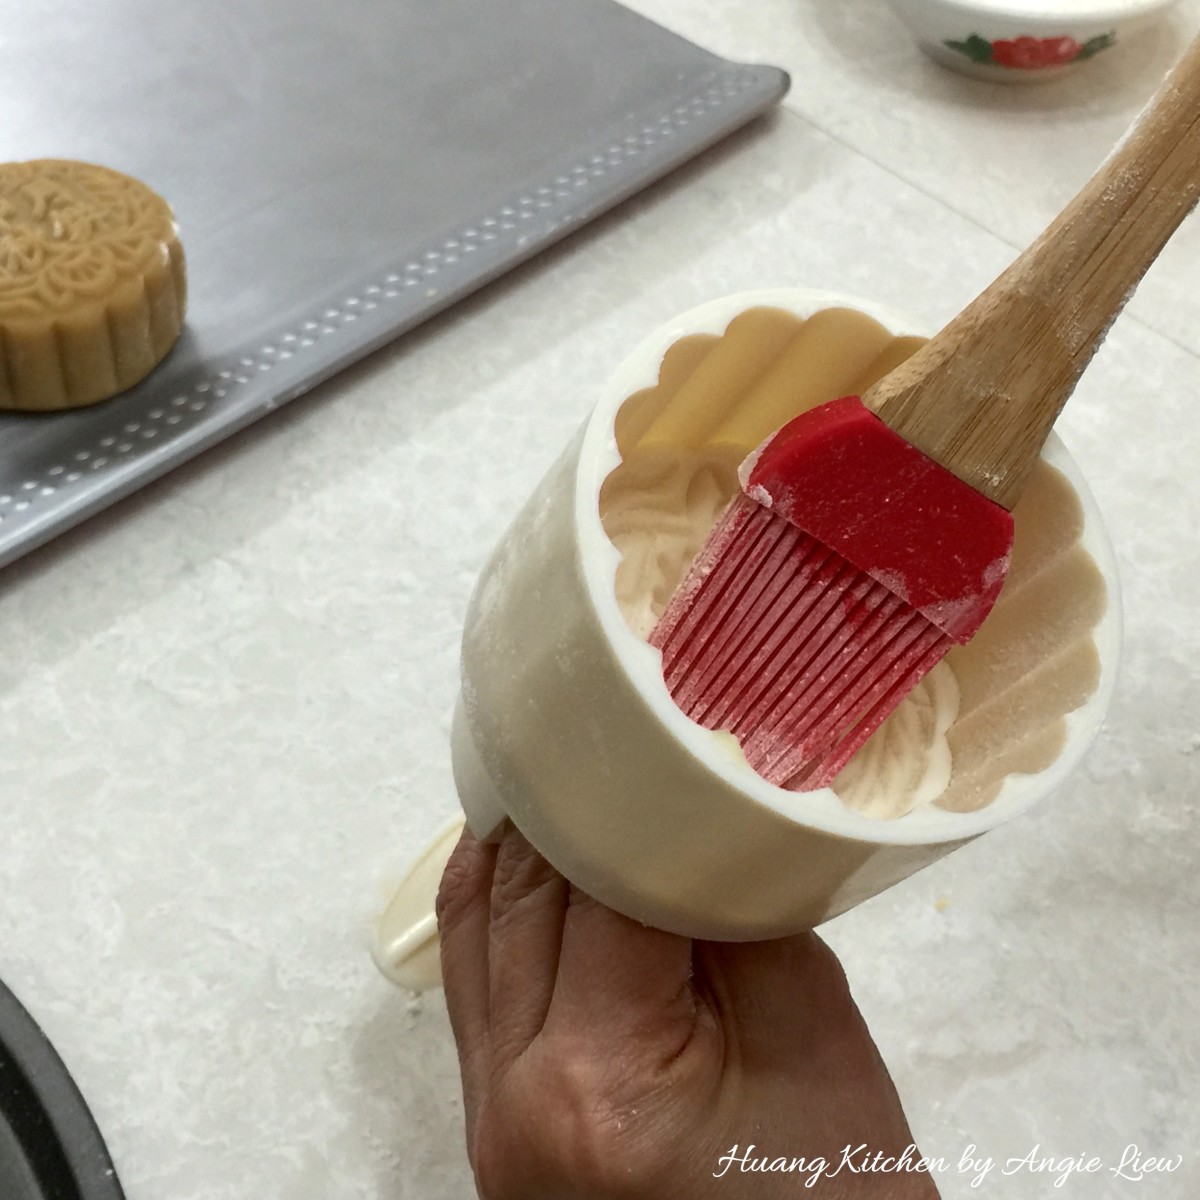 Traditional Baked Mooncakes Recipe by Huang Kitchen - Brush plastic mooncake mould press with flour